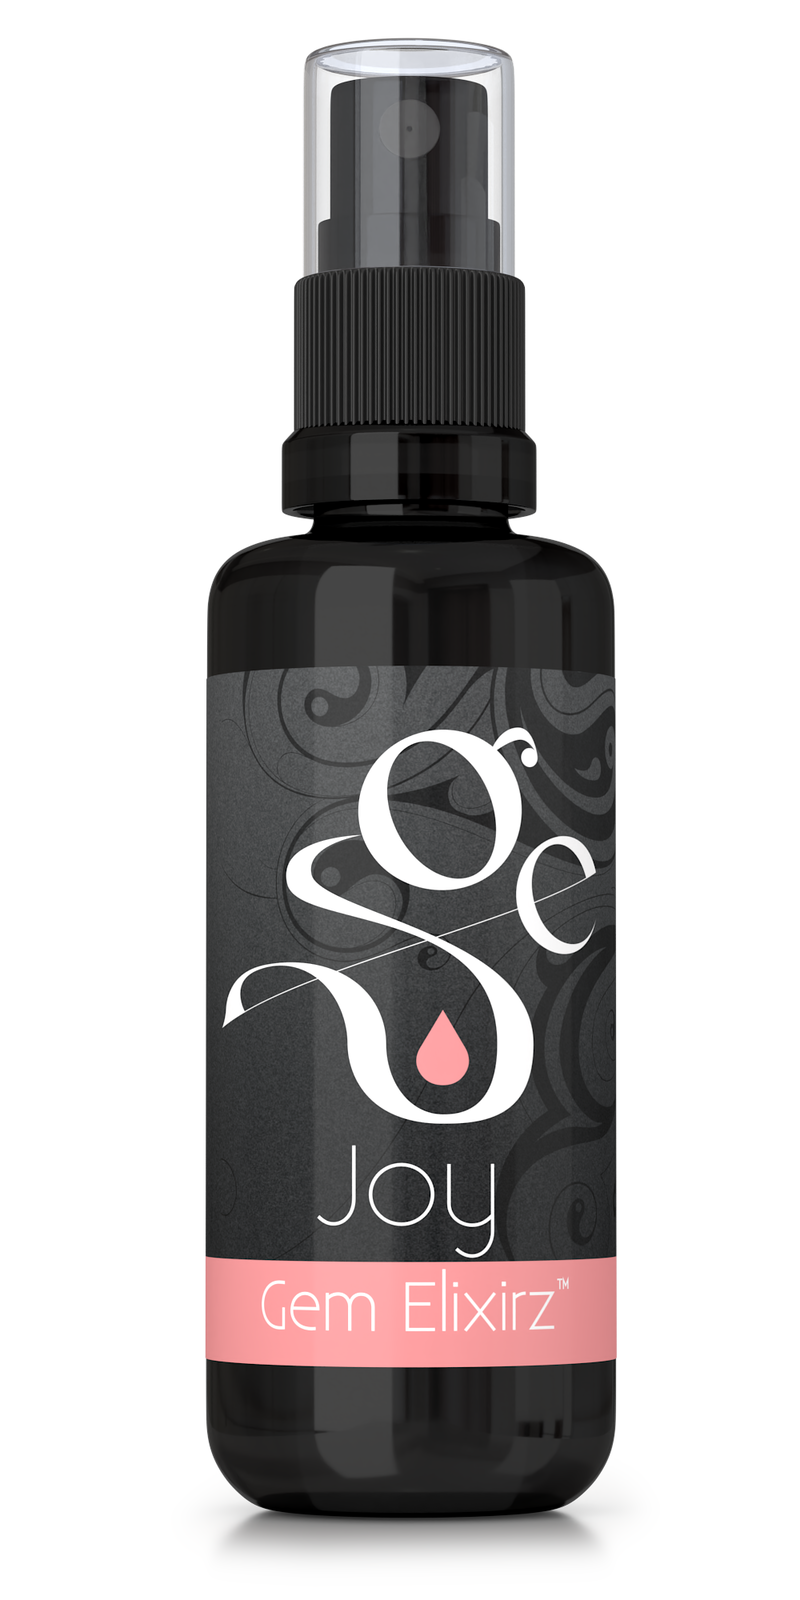 Joy aromatherapy spray with essential oils and gemstones, frontside of bottle